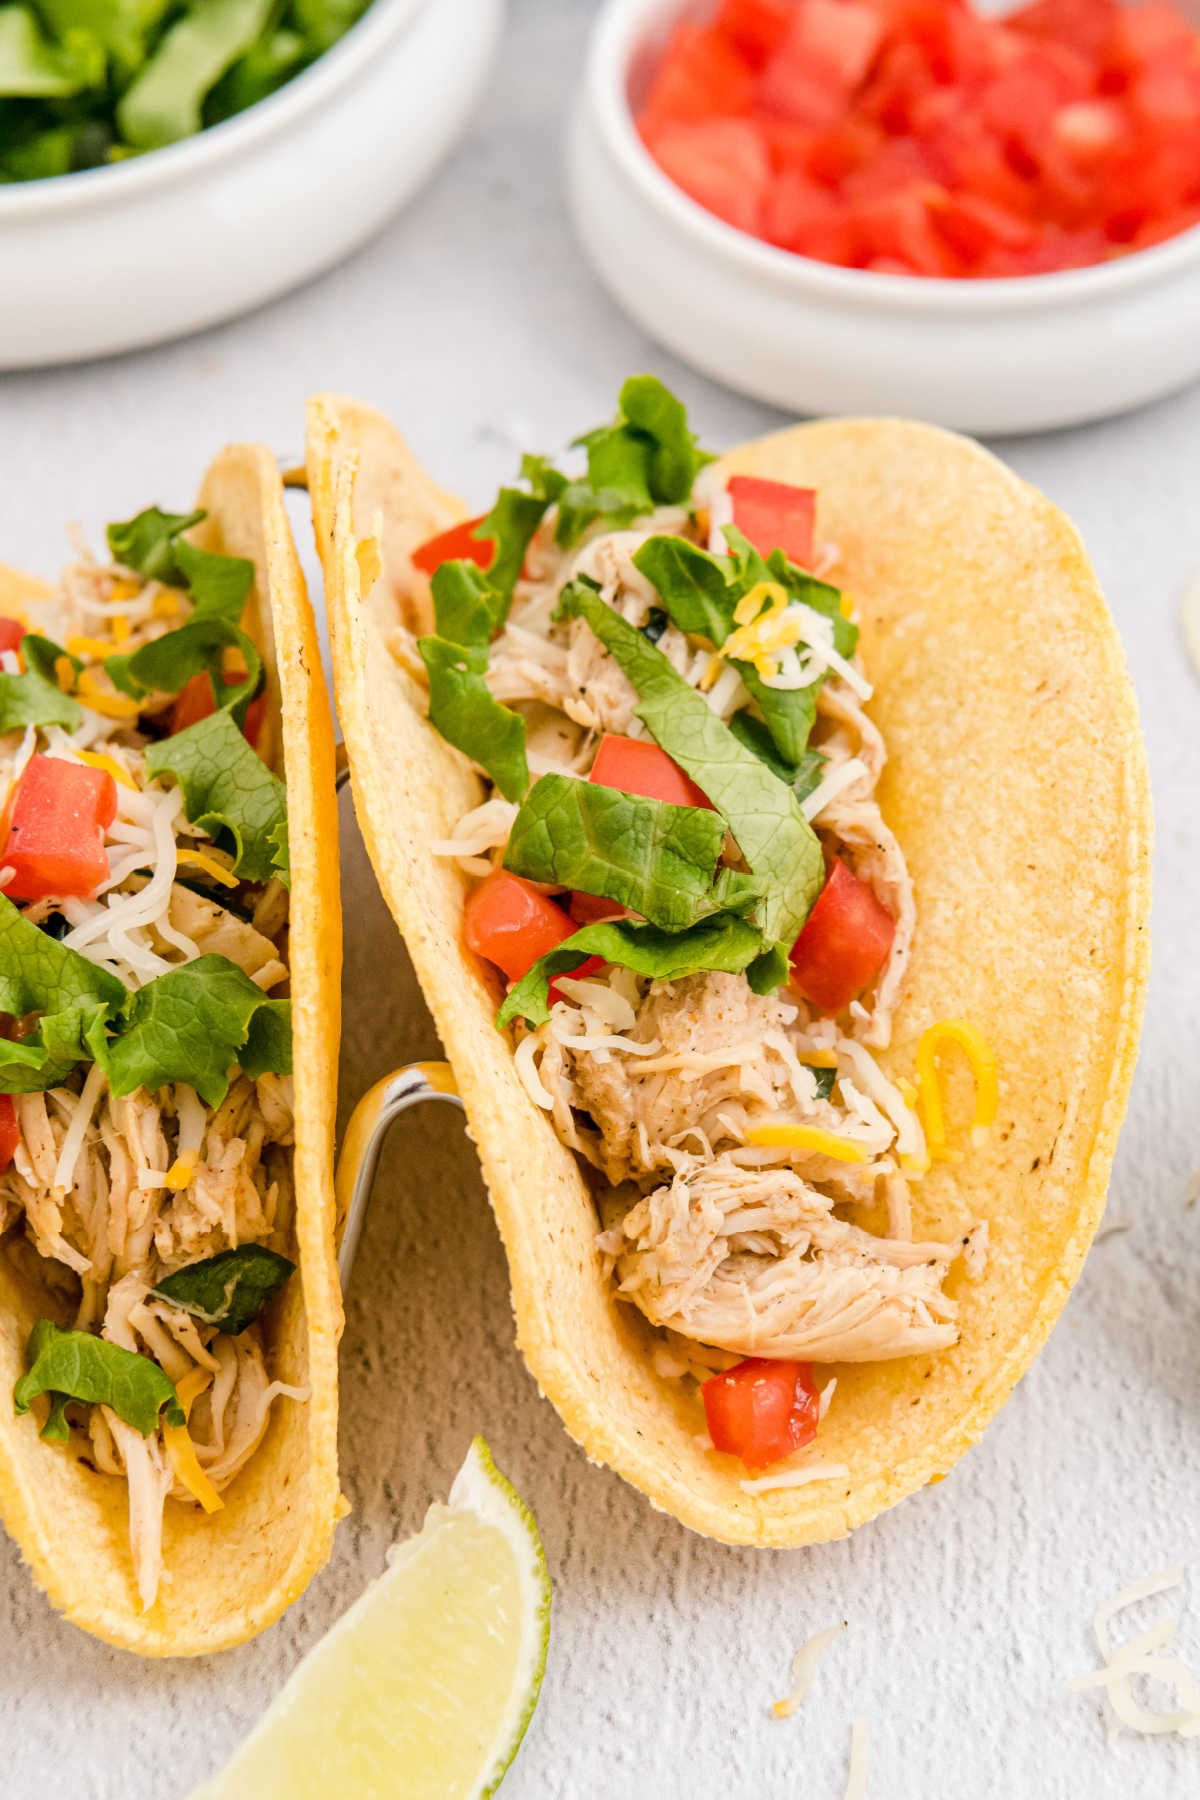 These Crockpot Shredded Chicken Tacos are my go-to weeknight dinner. They’re juicy, flavorful, and SO easy to make. via @foodfolksandfun